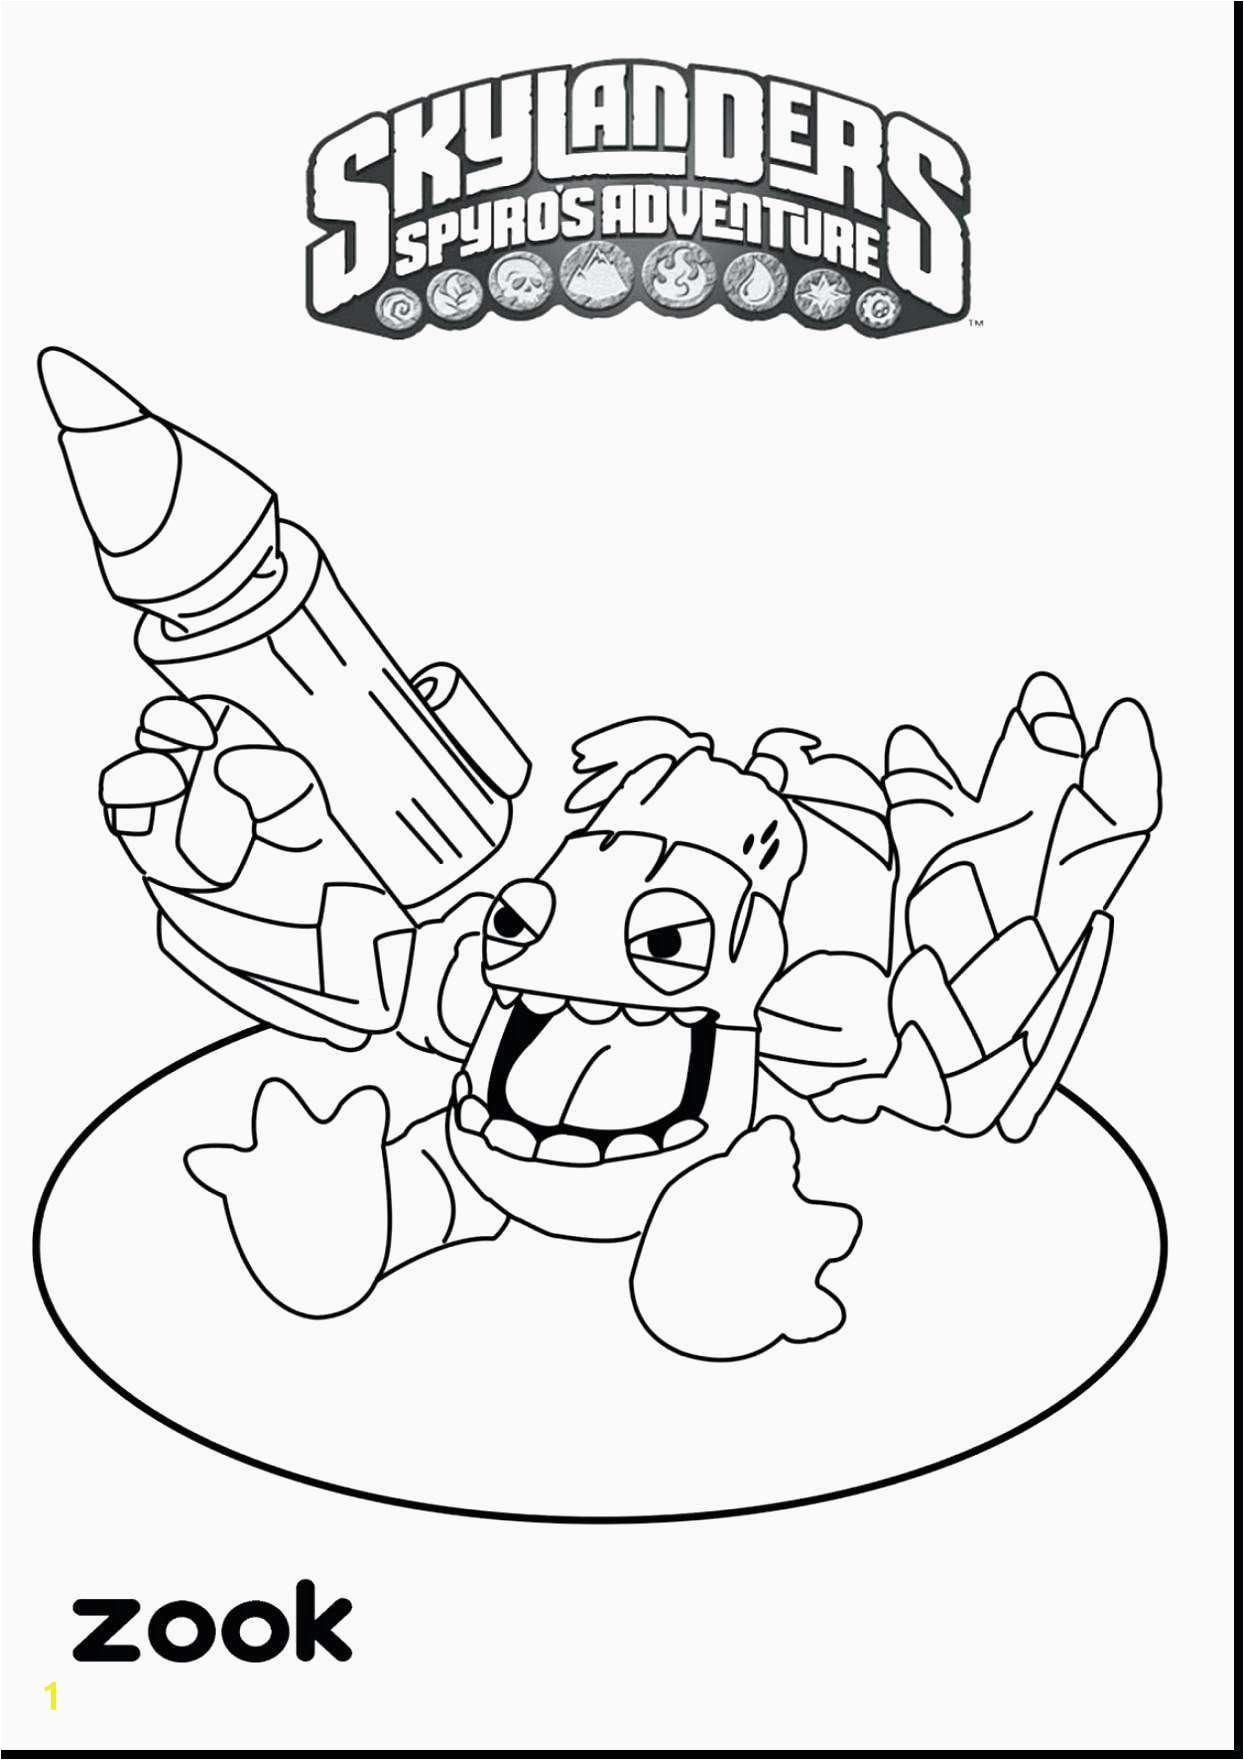 Free Coloring Pages for Girl Scouts Free Girl Scout Coloring Pages for Daisies Printable Coloring Pages